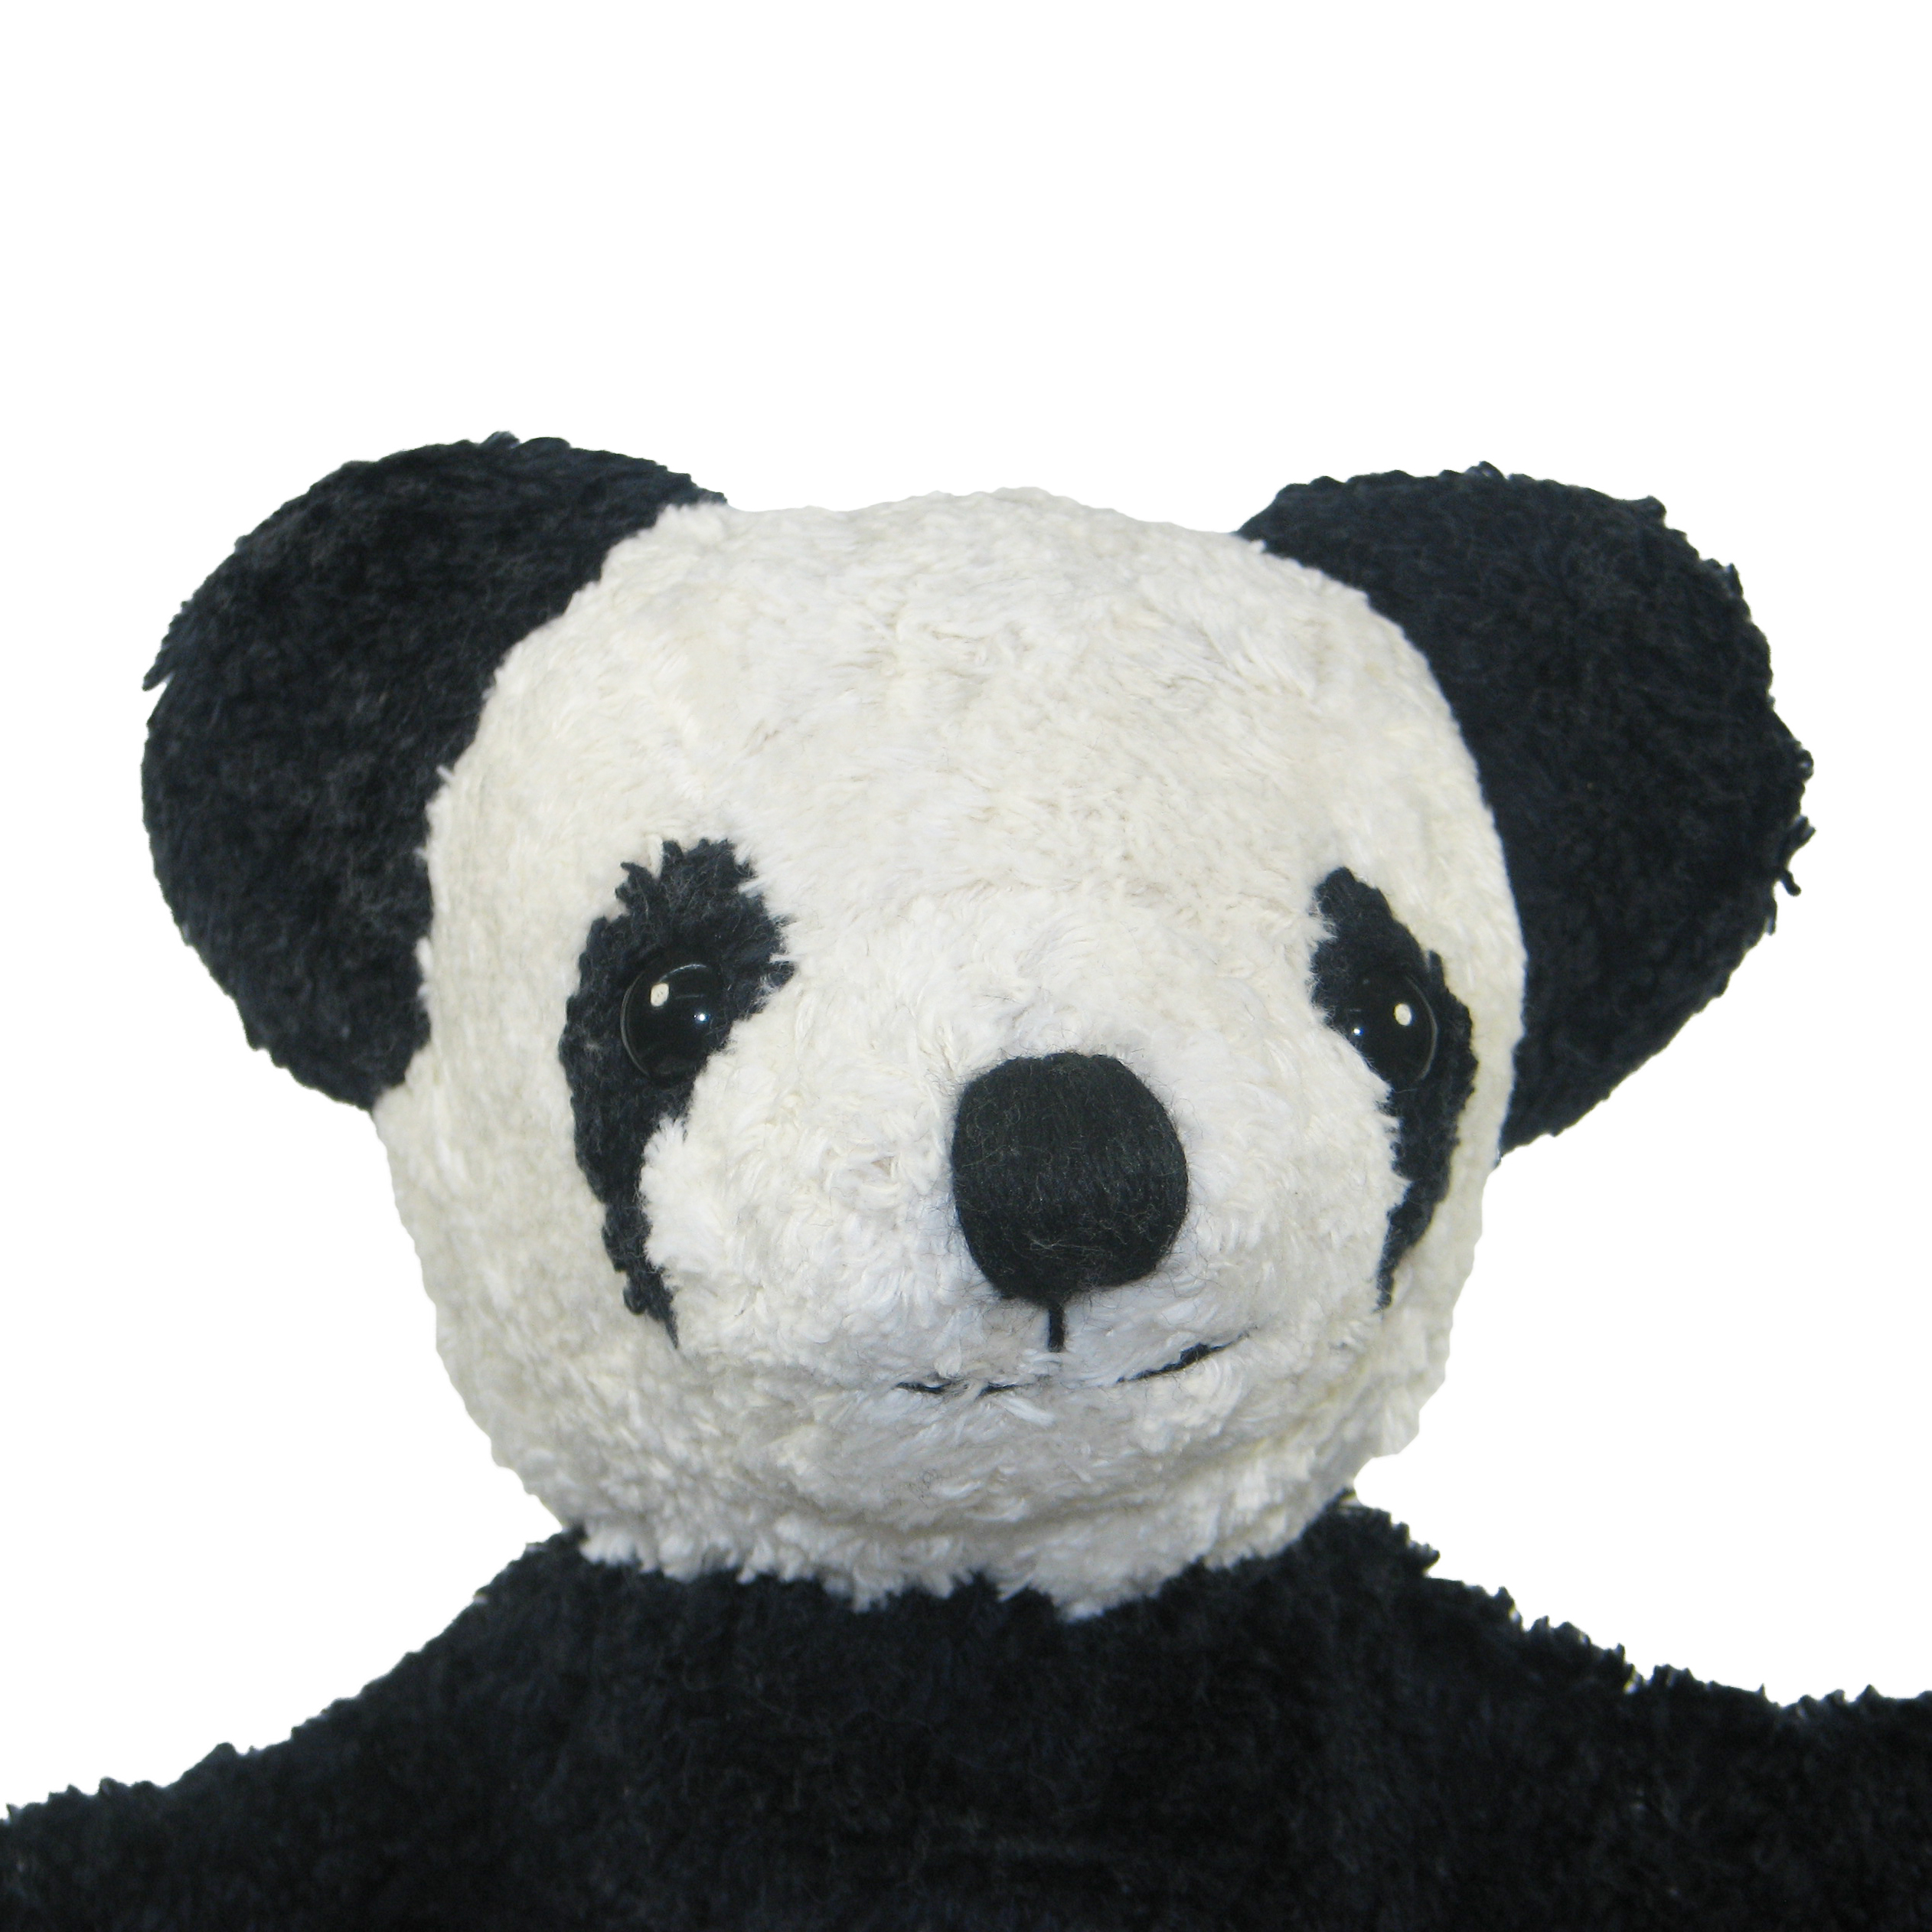 Hand puppet panda - made of natural material - by Kallisto